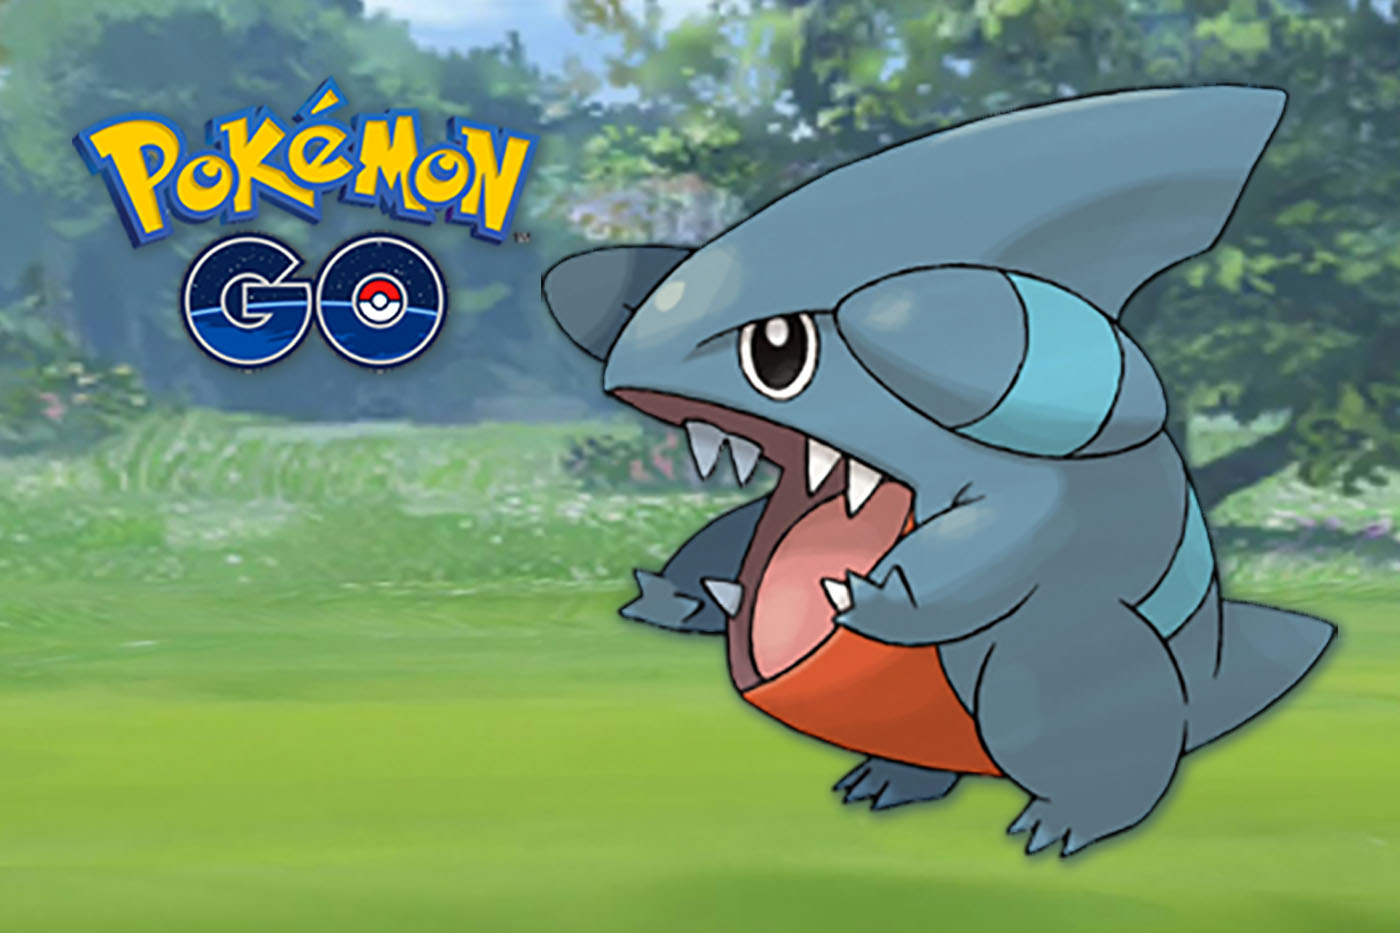 Shiny Gible is now available in 'Pokémon Go' .